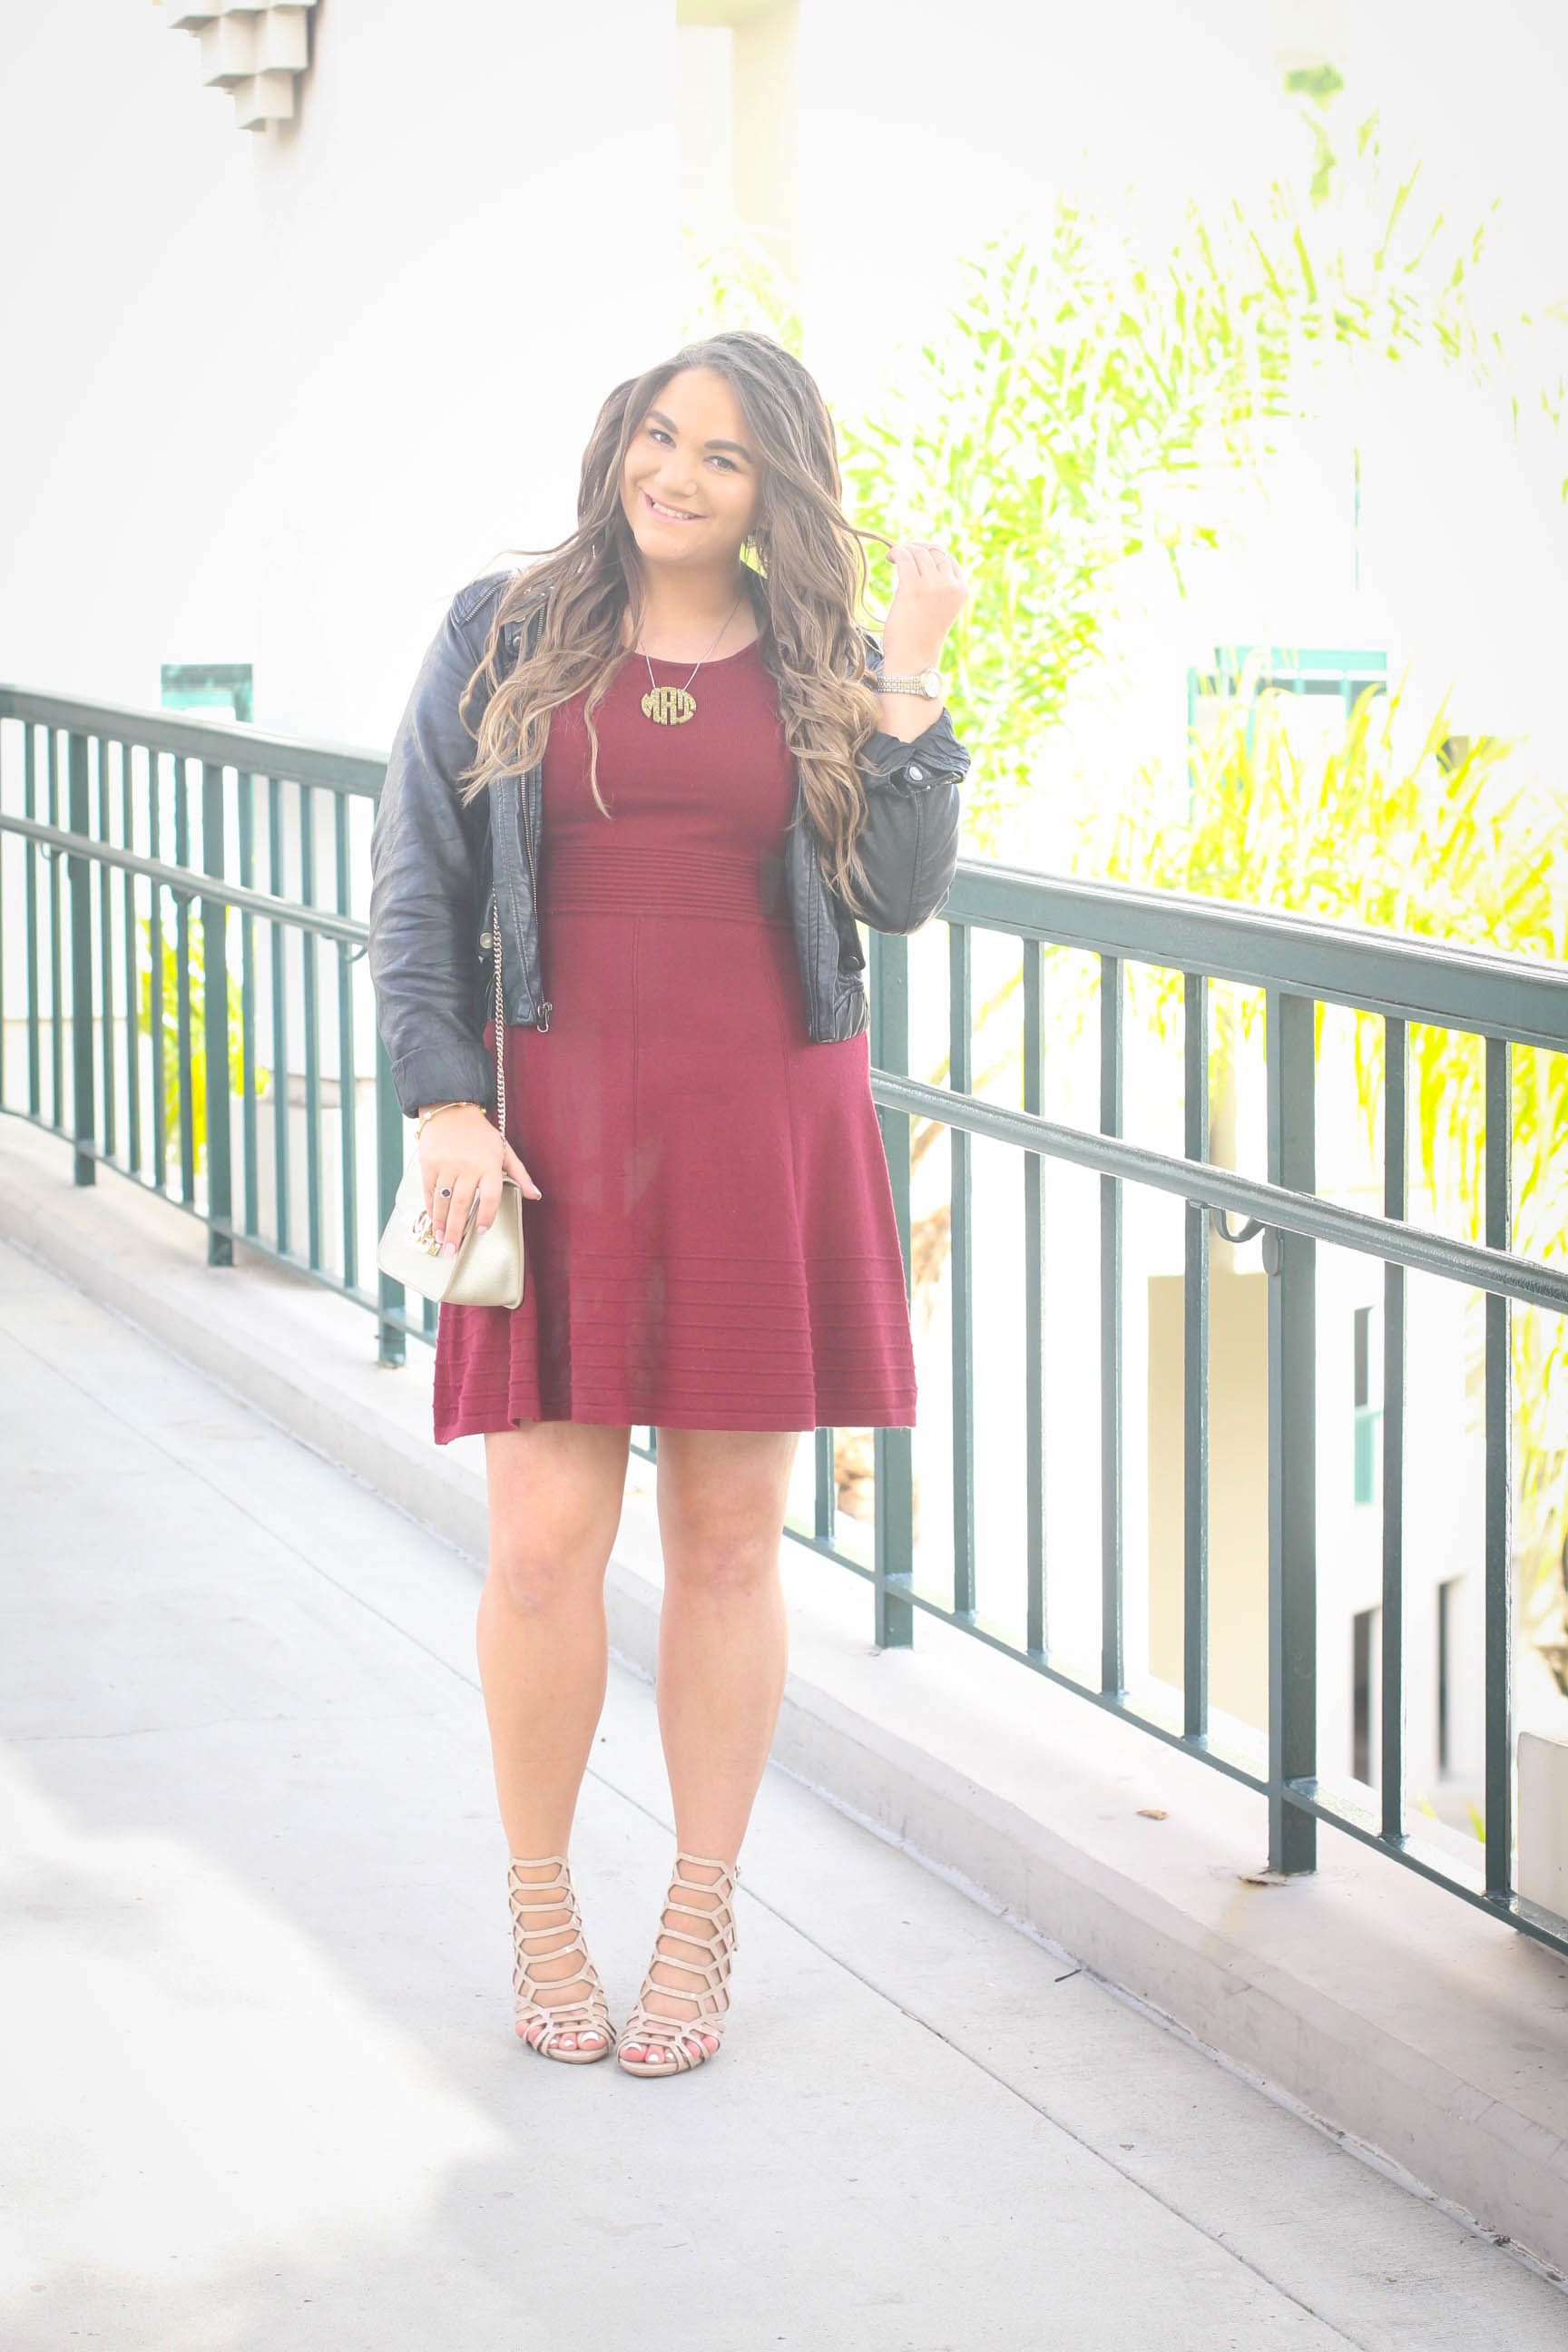 missyonmadison, sweater dress, how to style a sweater dress, how to style a moto jacket, moto jacket, maroon dress, maroon sweater dress, caged heels, nude gladiator heels, gold crossbody bag, gold bag, mezzanotte bag, nude heels, nude caged heels, holiday dress guide, what to wear for the holidays, christmas outfit ideas, melissa tierney, sweater dress,